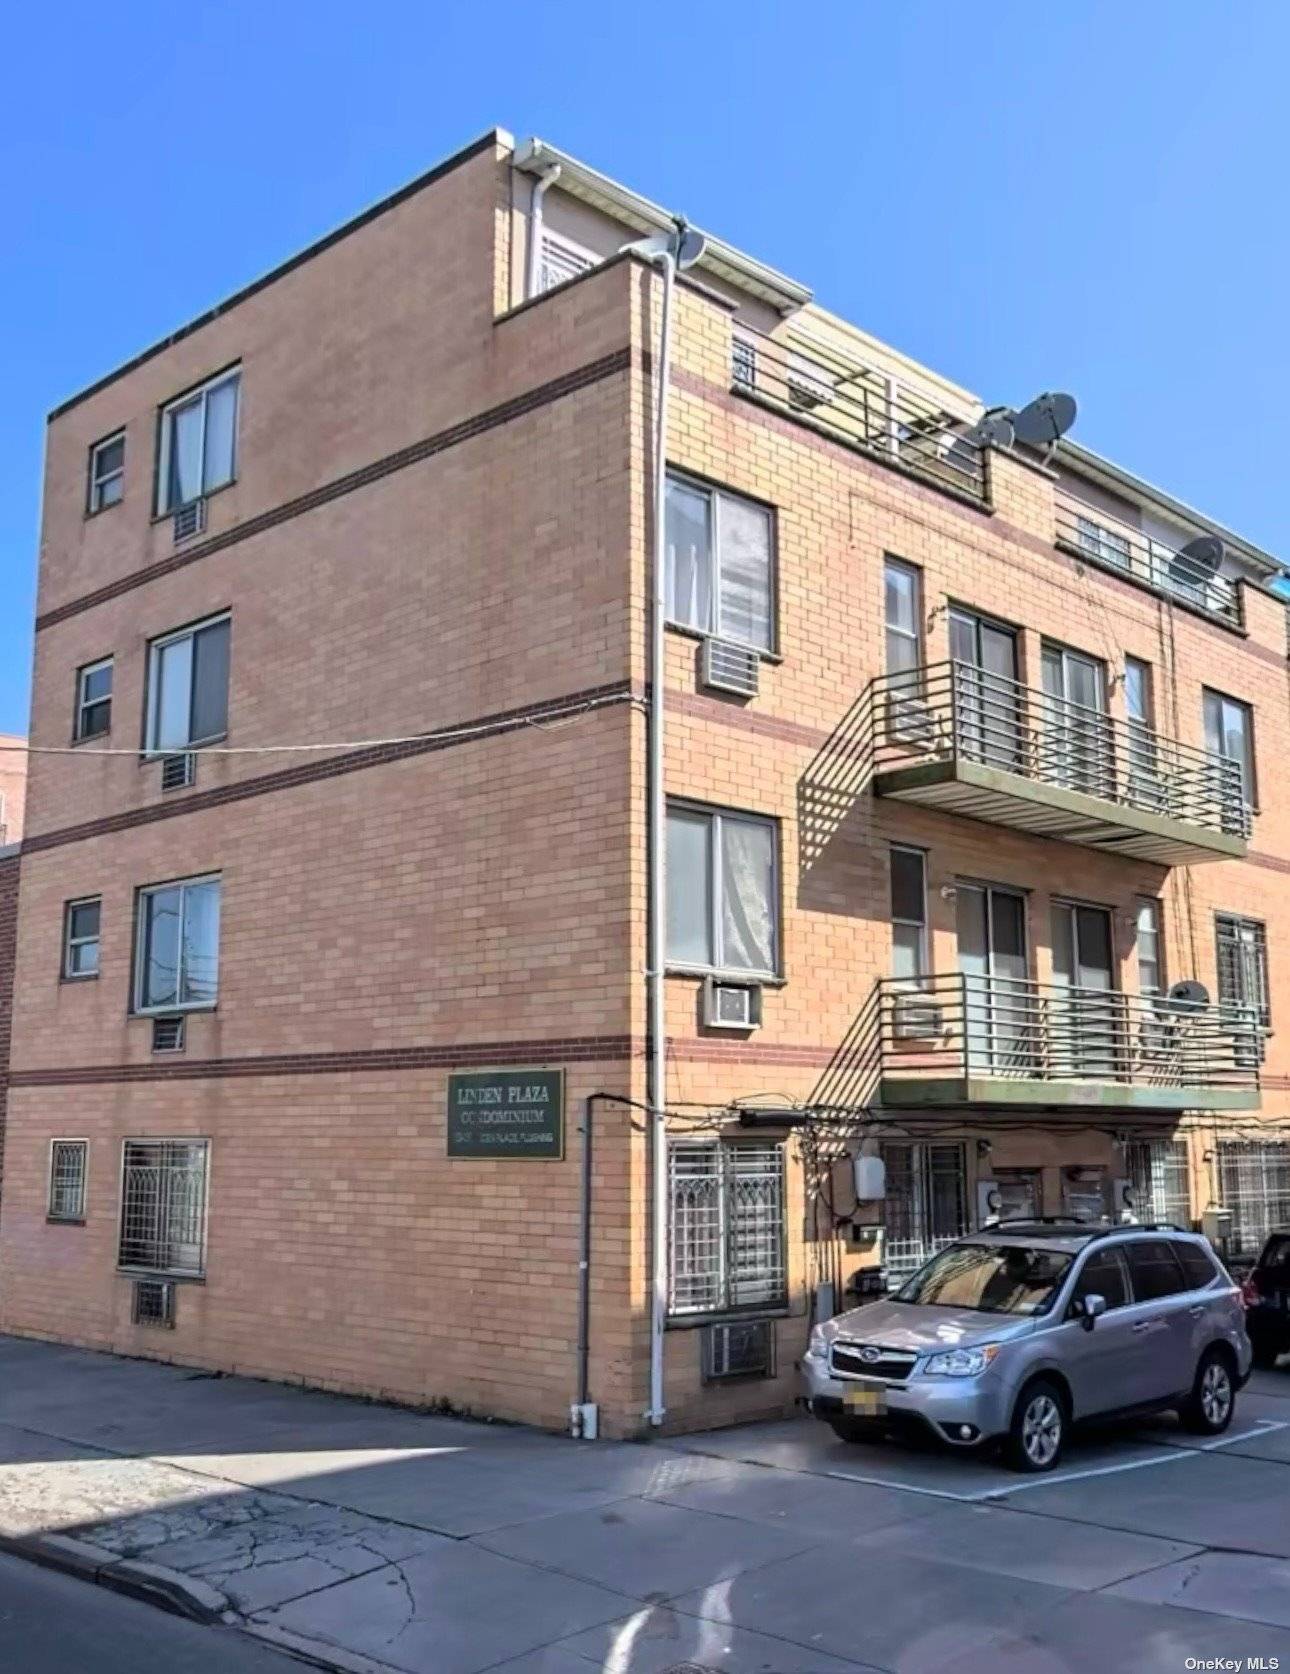 Introducing a stunning duplex condo in the heart of Flushing !